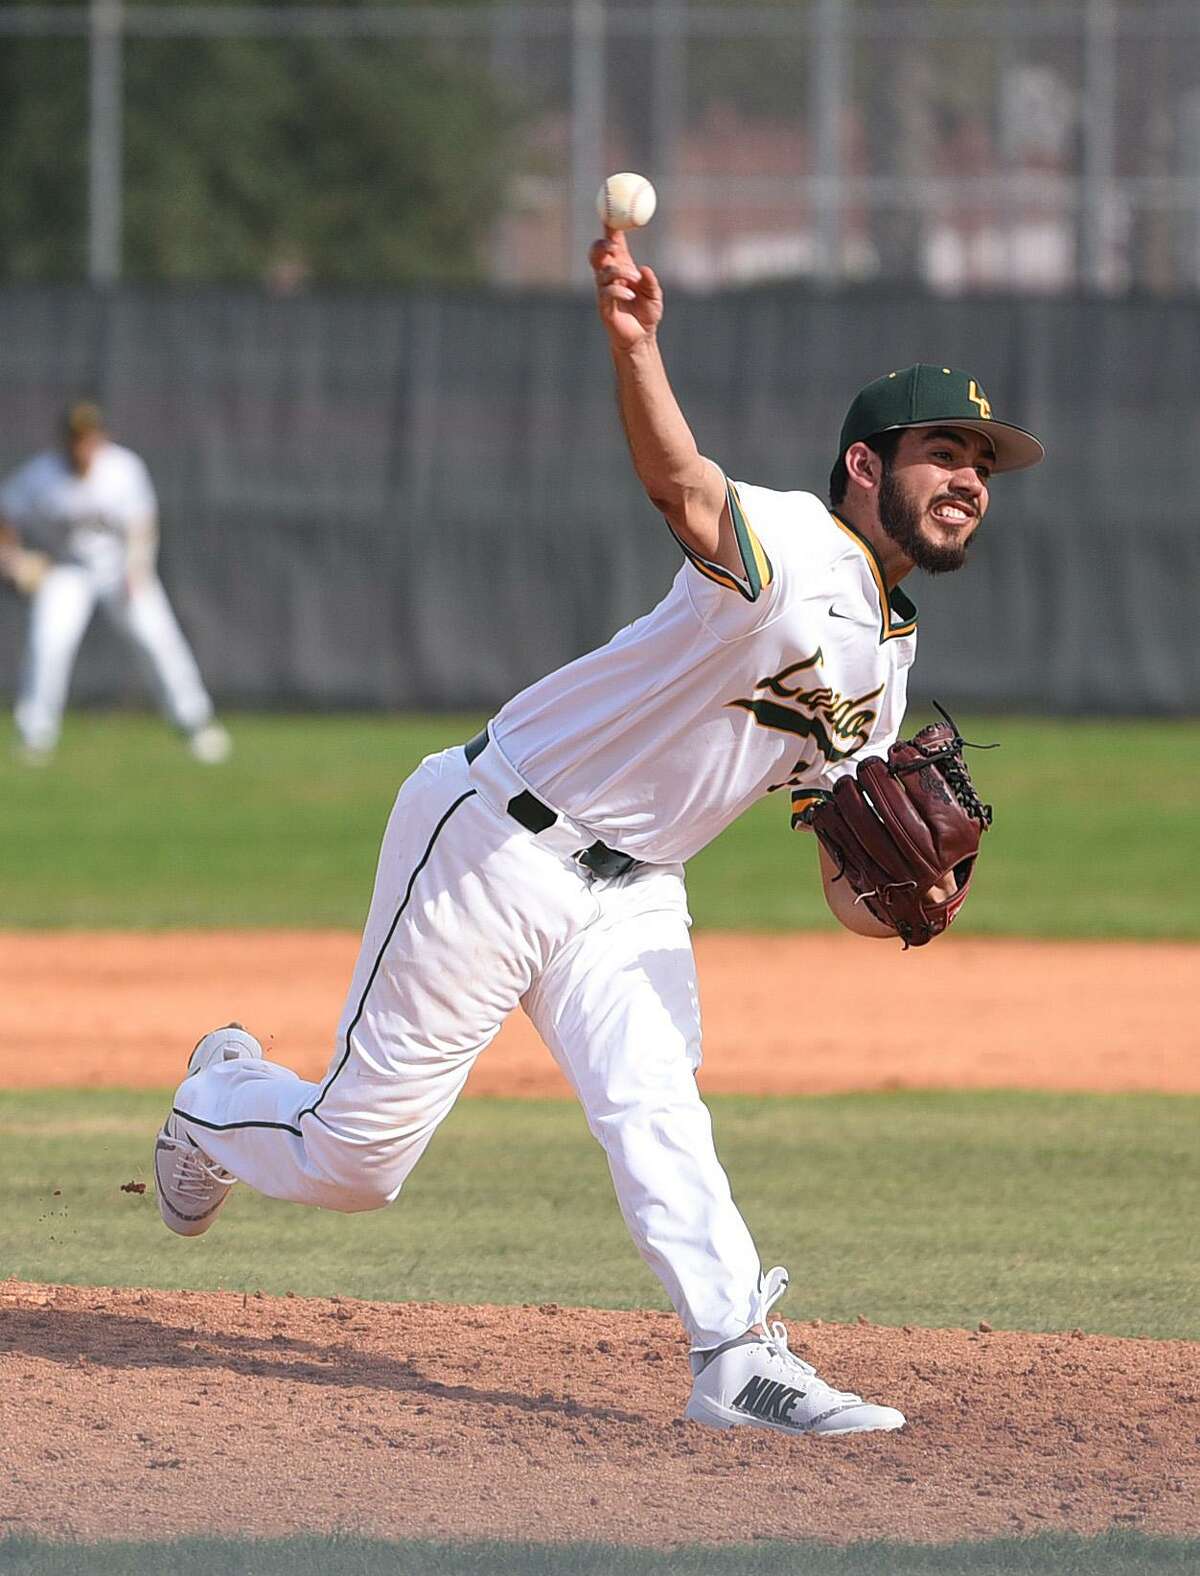 Pitcher Cristian Ramos and the Palominos went 1-3 this past weekend against Blinn College to snap a four-game win streak.